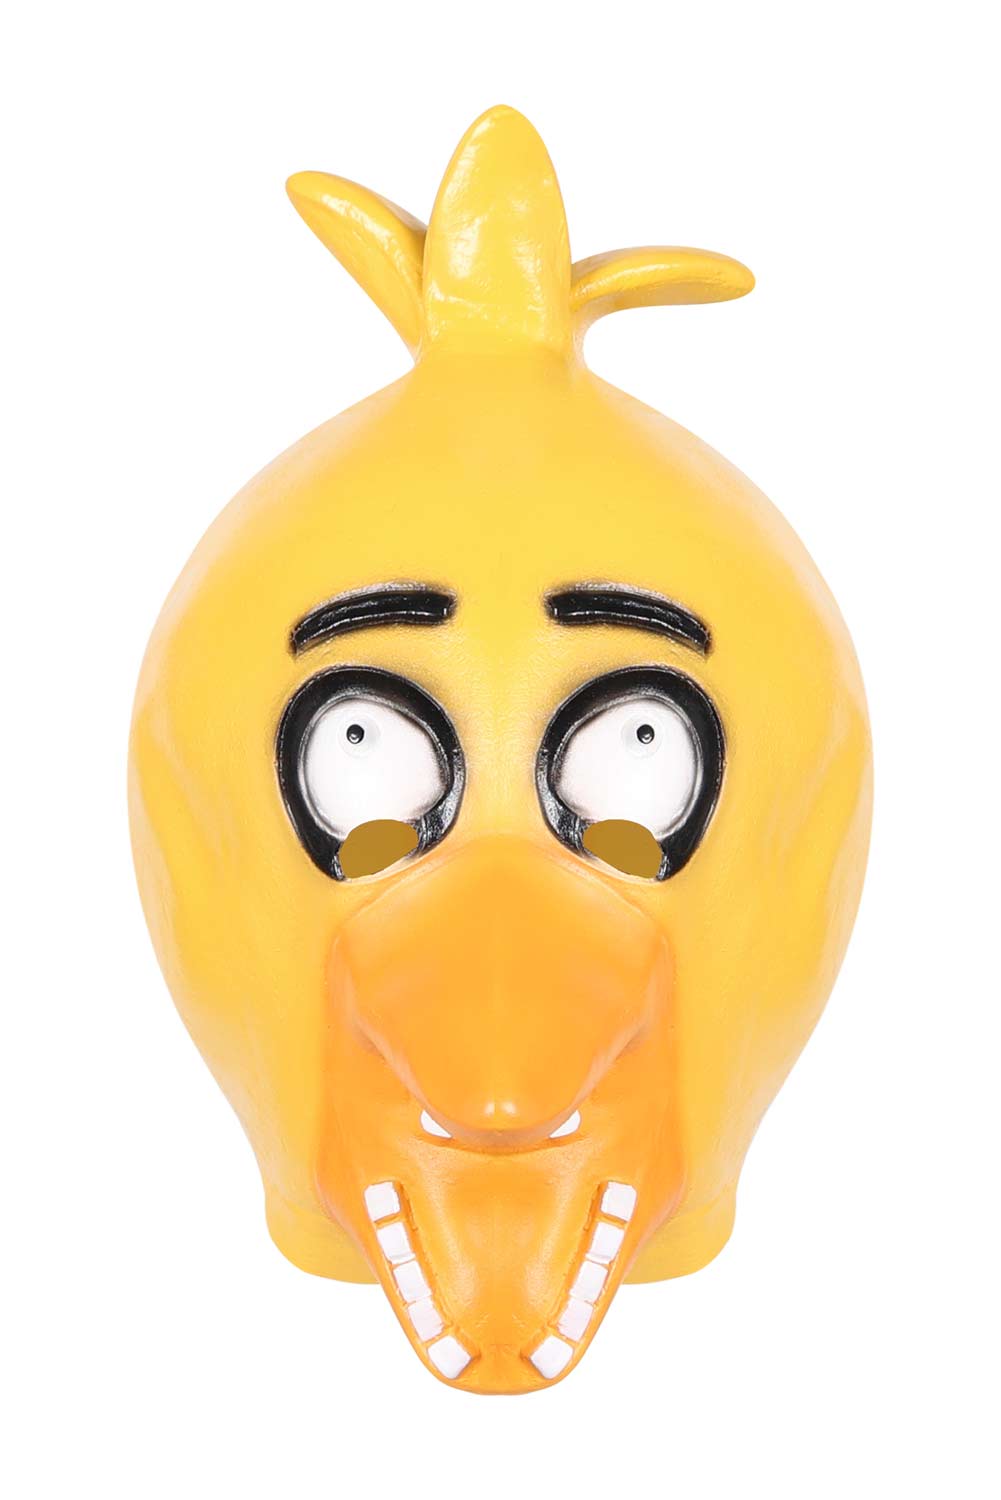 Movie Five Nights at Freddy's Yellow Chicken Chica Cosplay Latex Masks Helmet Masquerade Halloween Party Costume Props